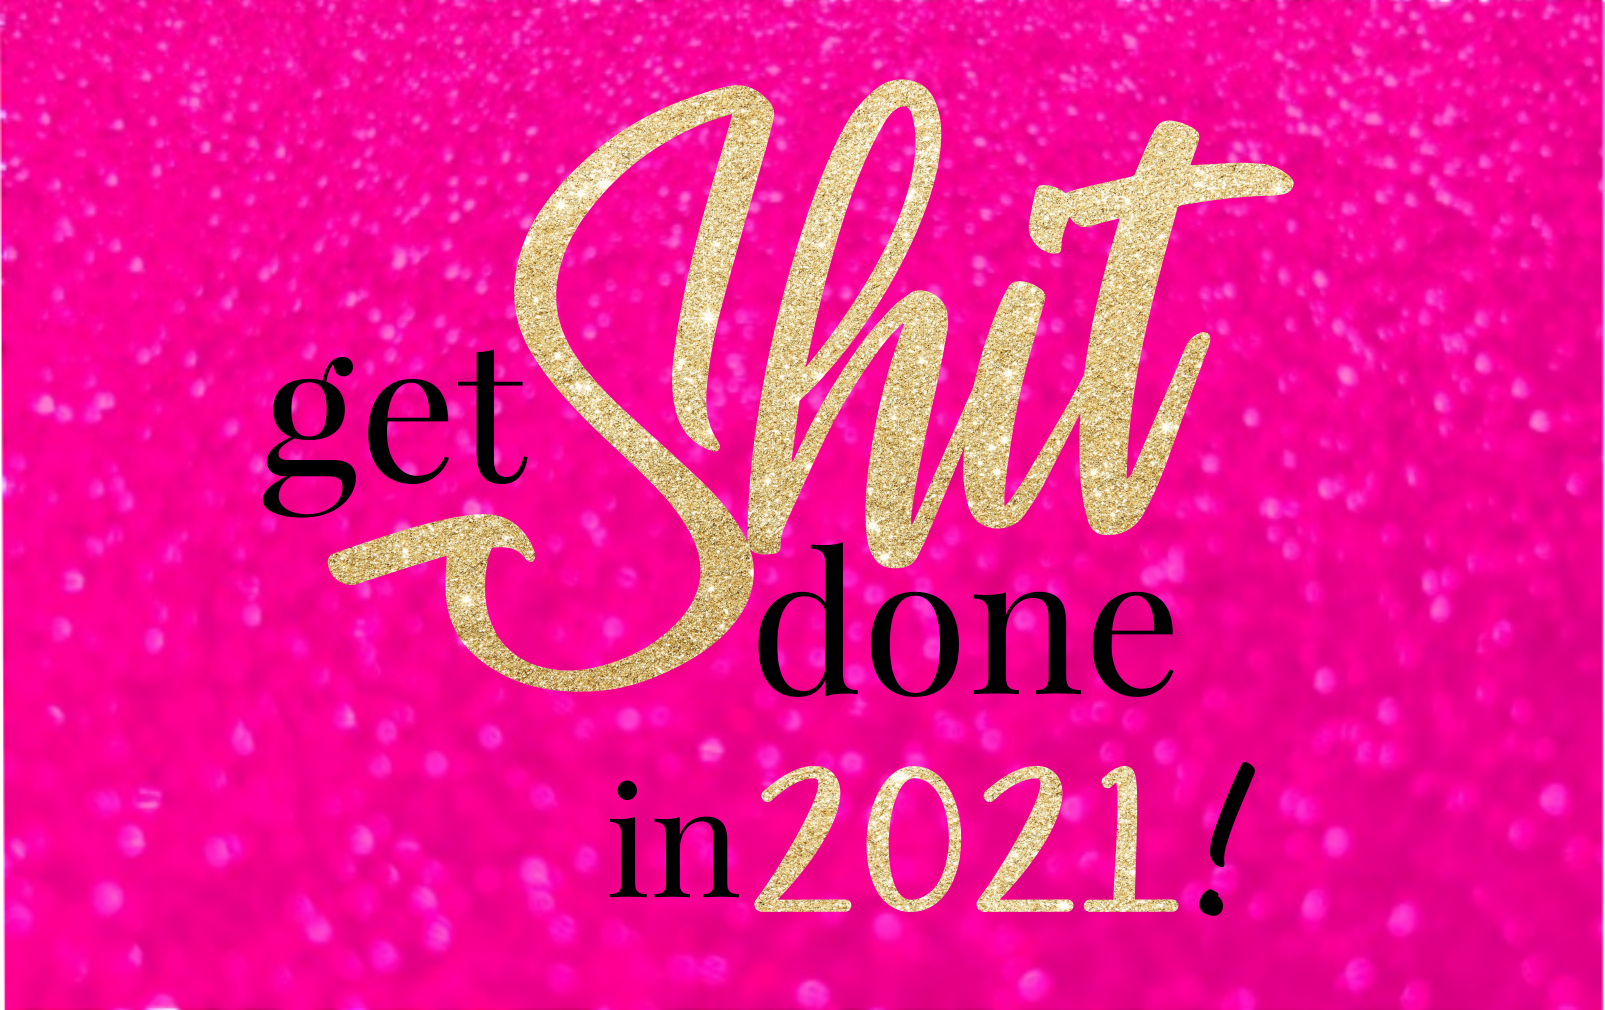 get shit done in 2021